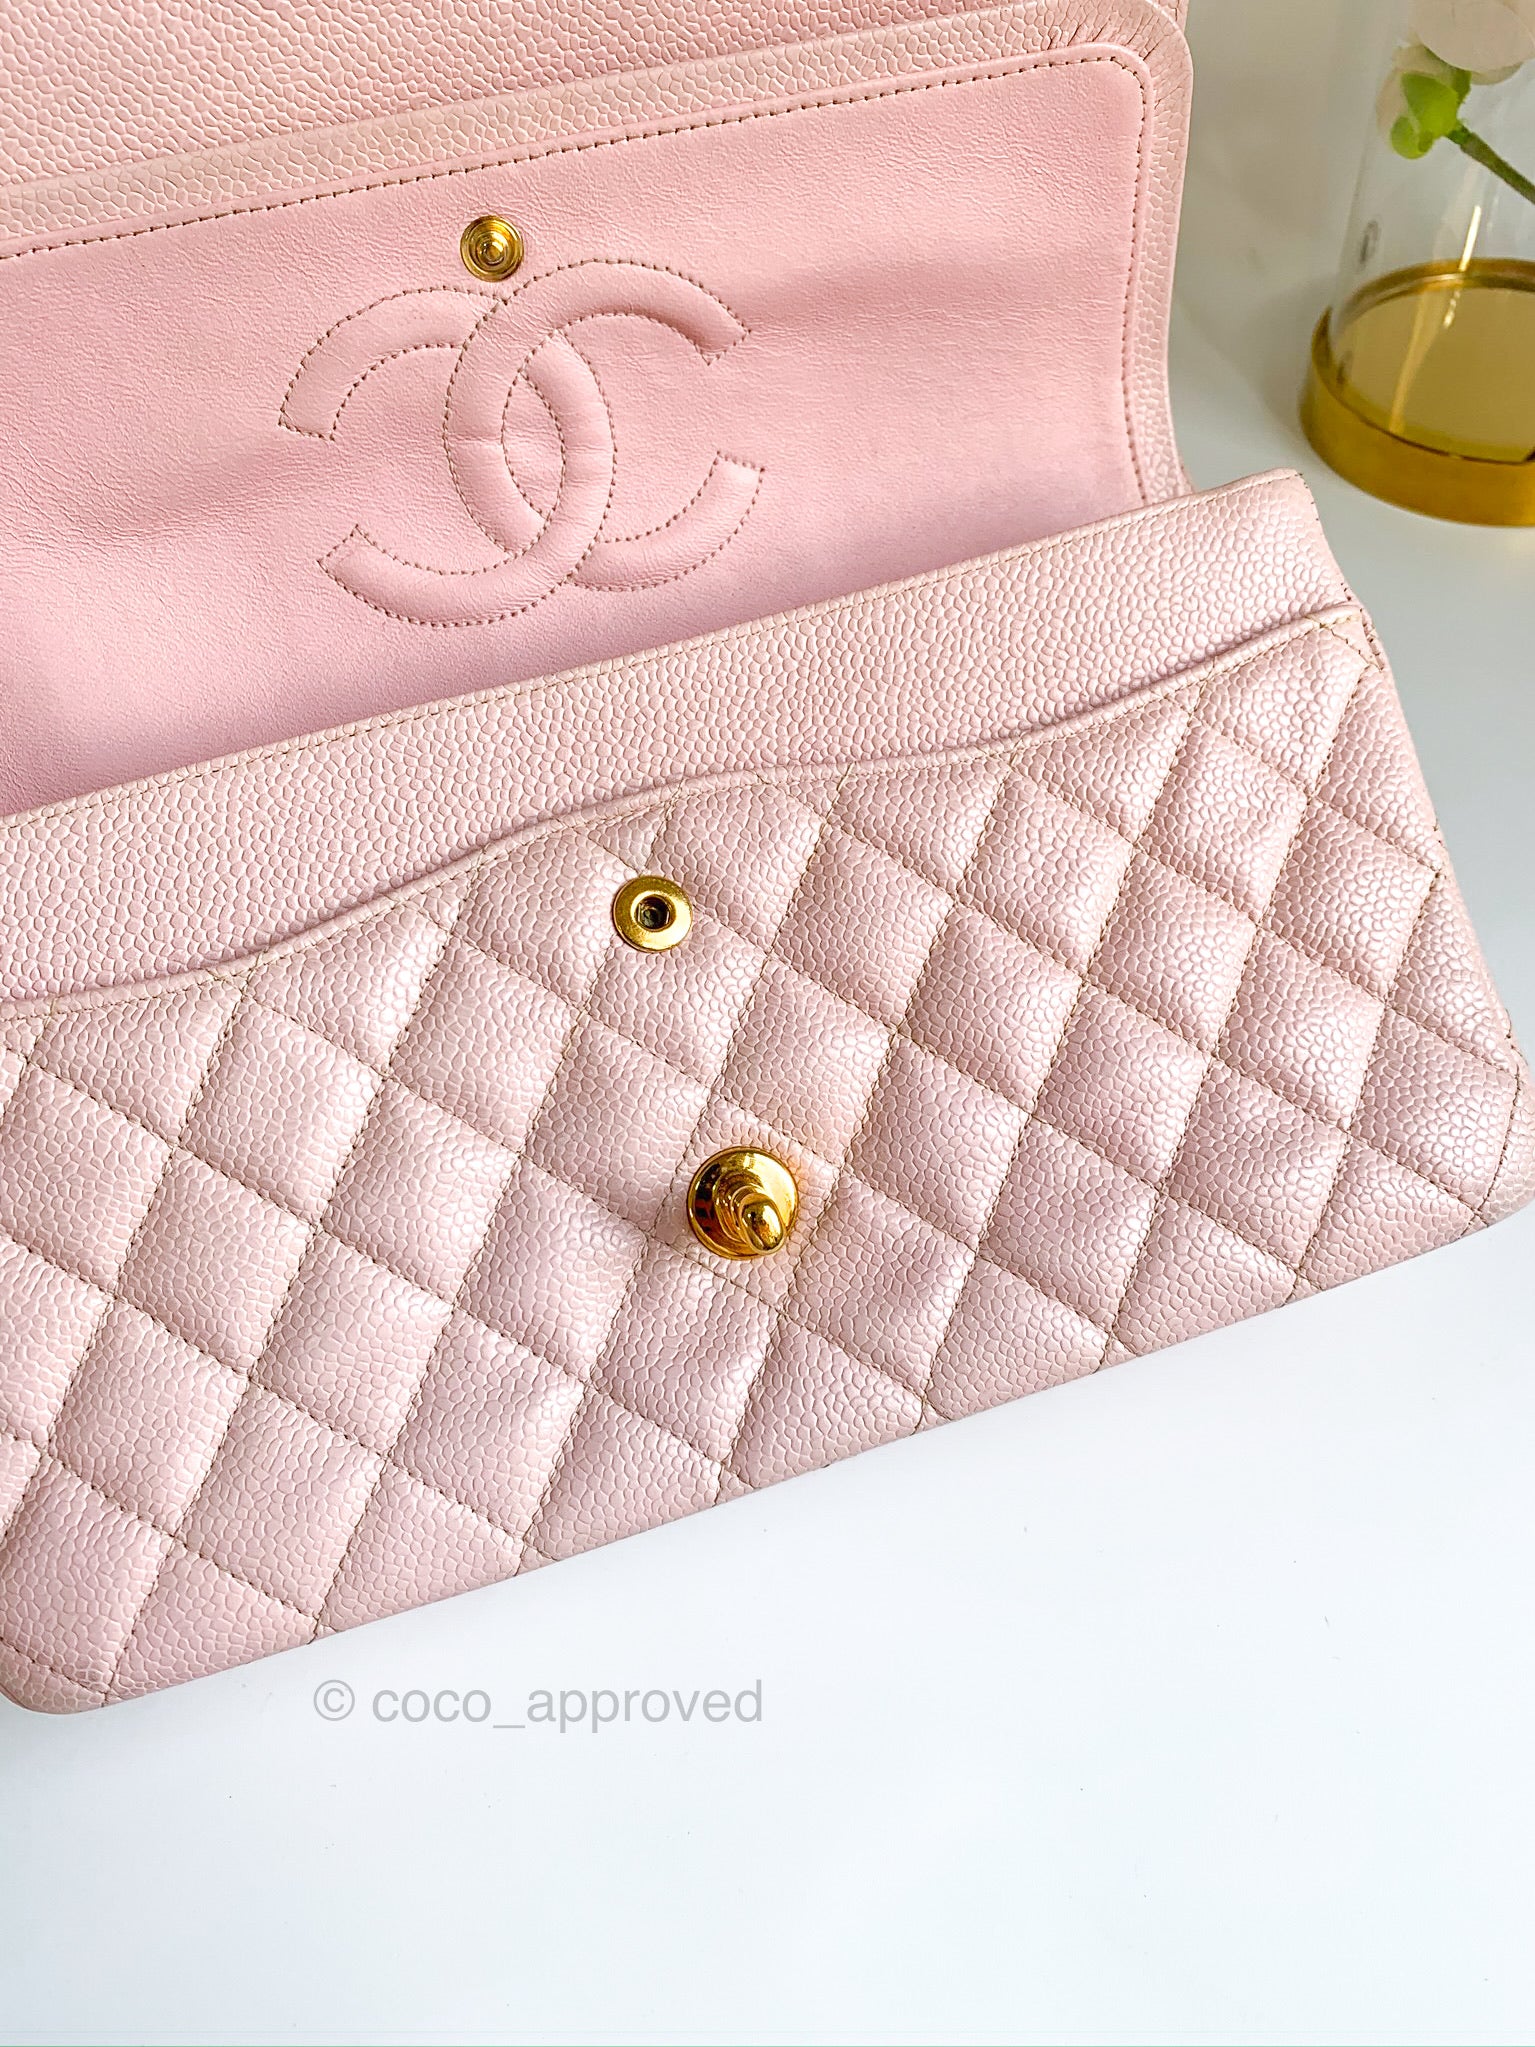 Chanel Classic Vintage M/L Pink Caviar 24K Gold Hardware – Coco